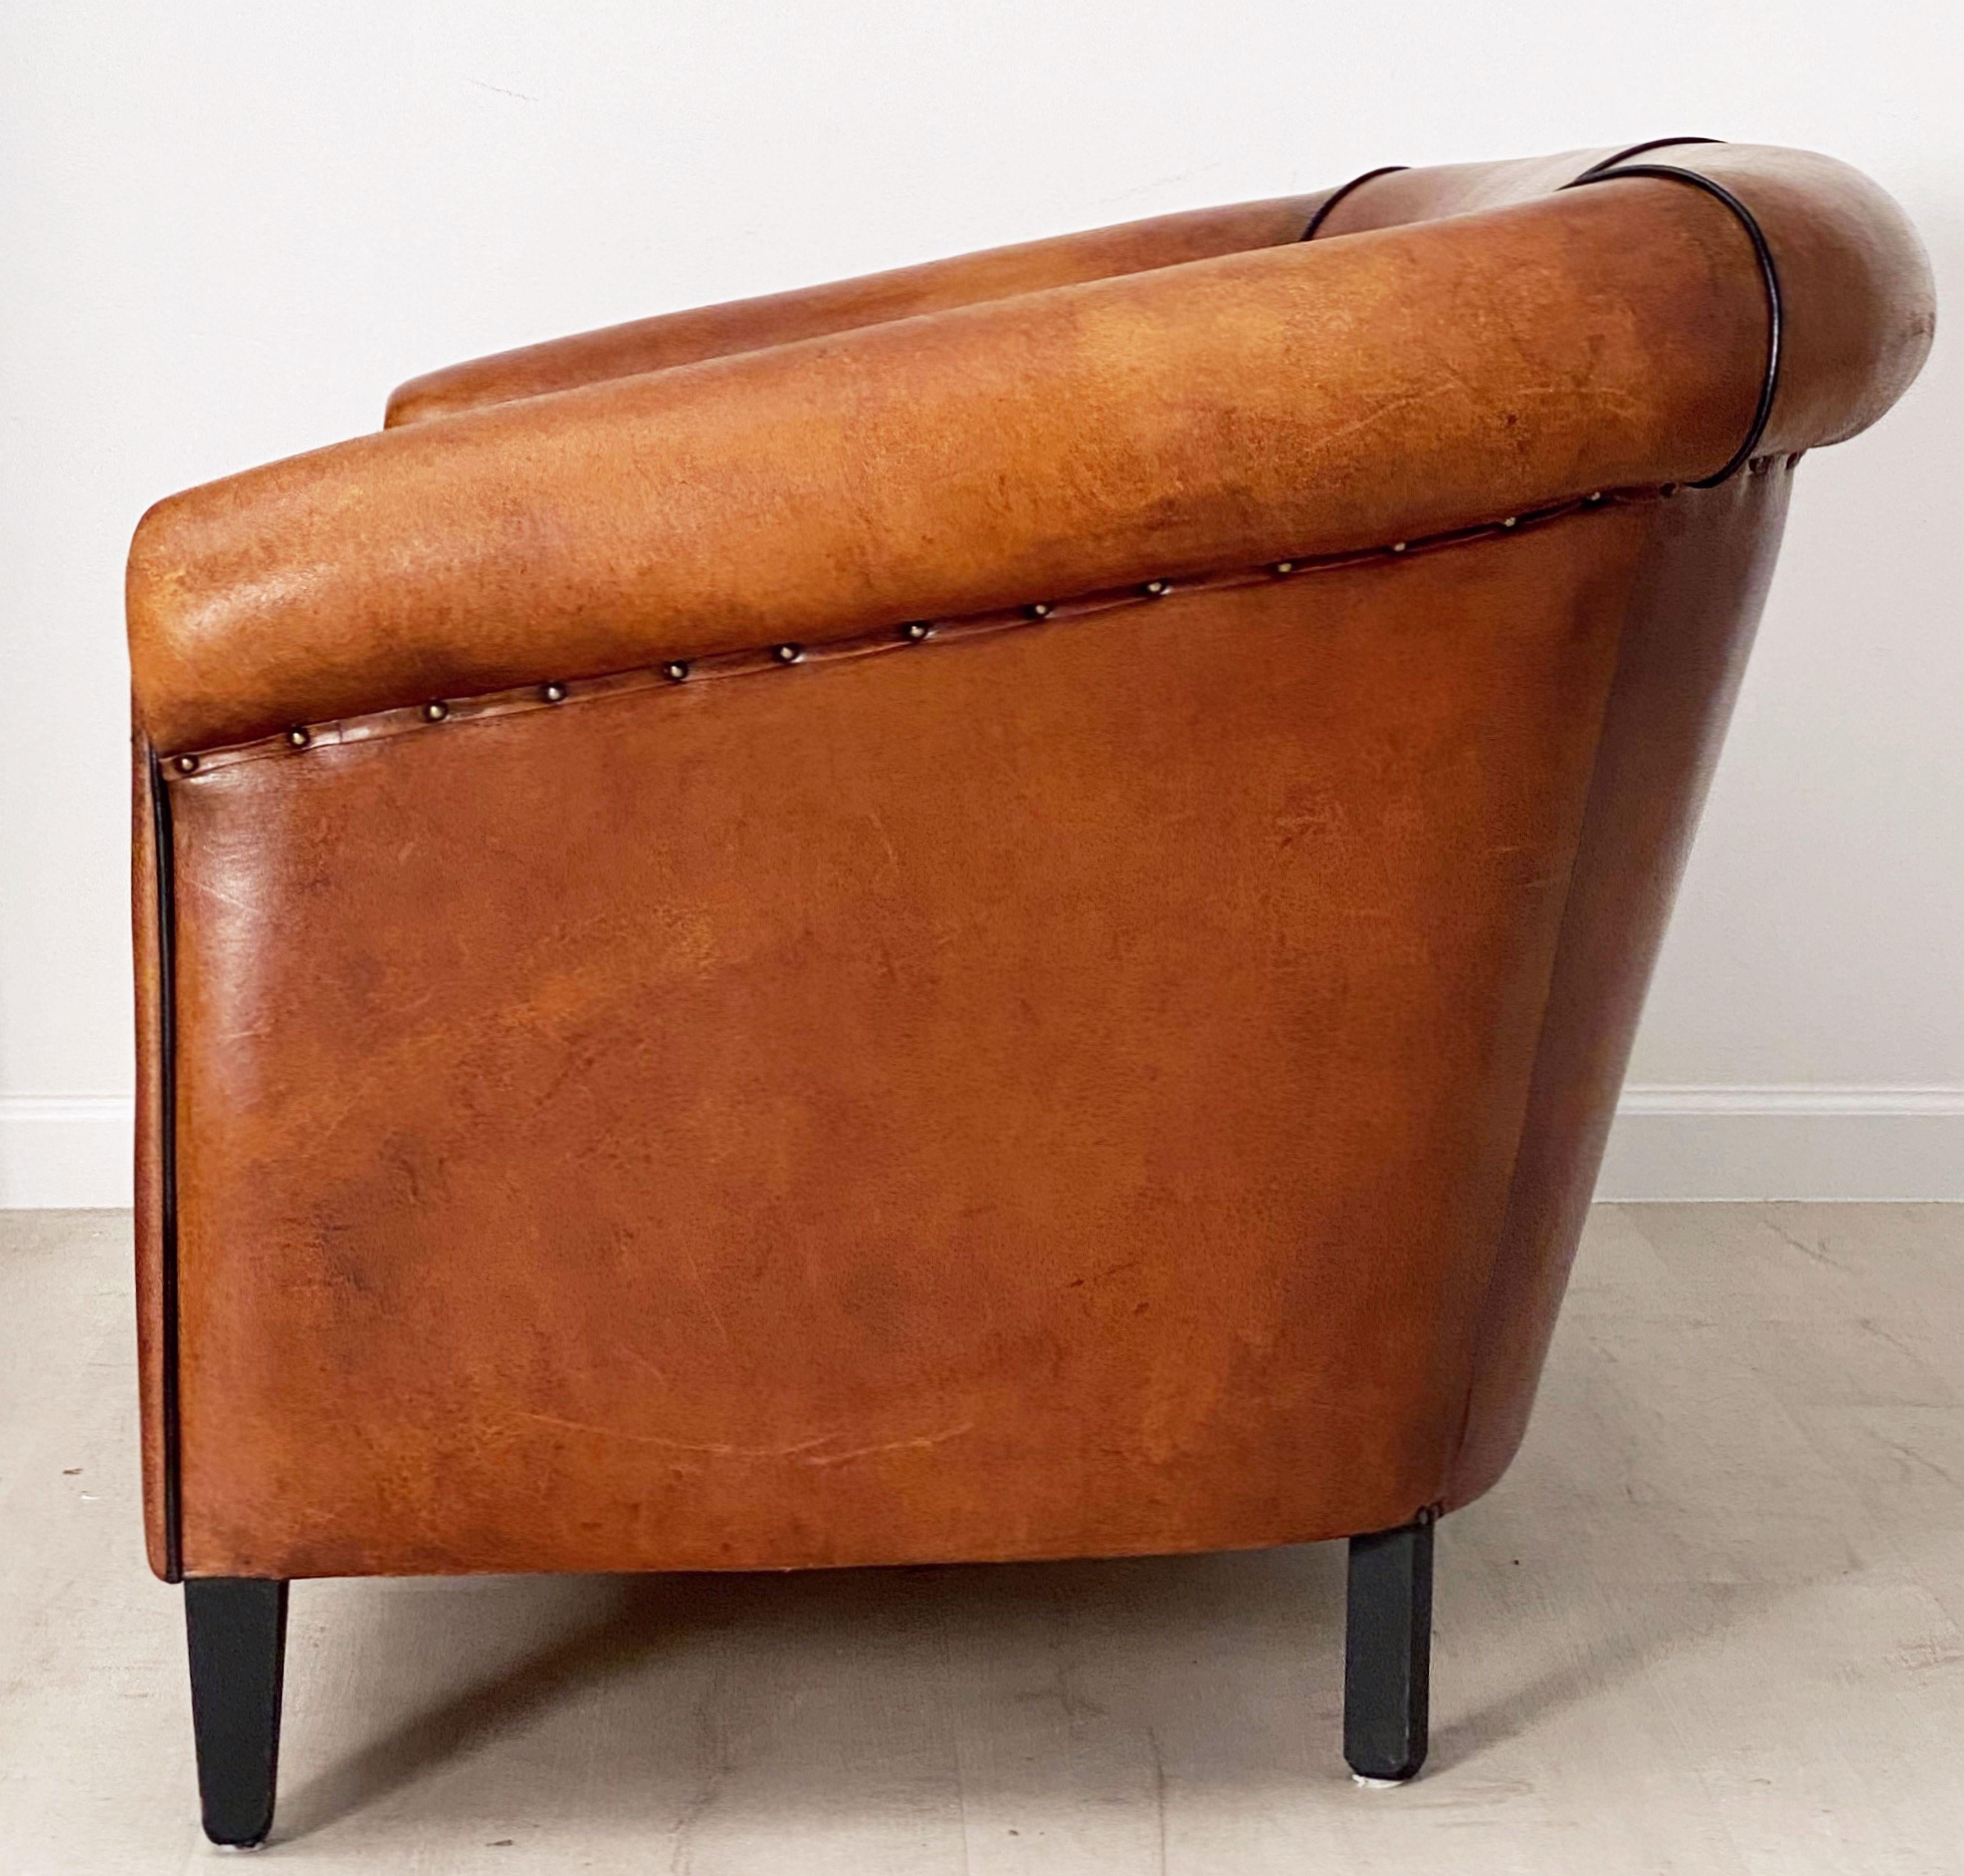 Dutch Upholstered Leather Sofa or Settee in the Art Deco Style 8